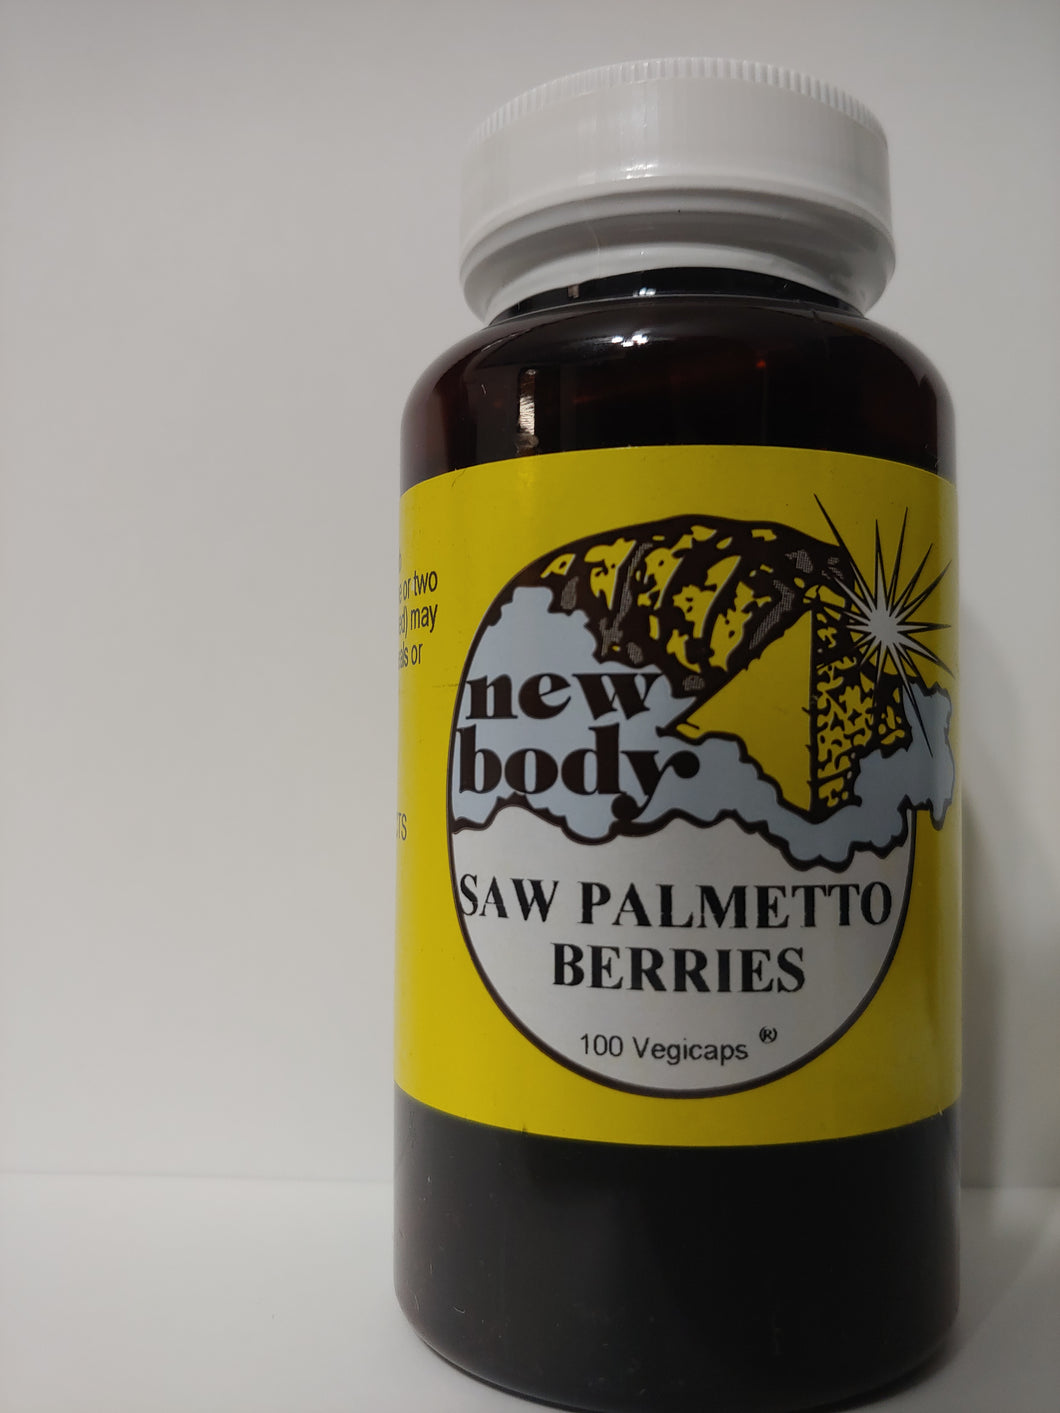 New Body Saw Palmetto Berries 100 Vegicaps 100 Vegicaps This Product Contains No Fillers, Binders, or Additives